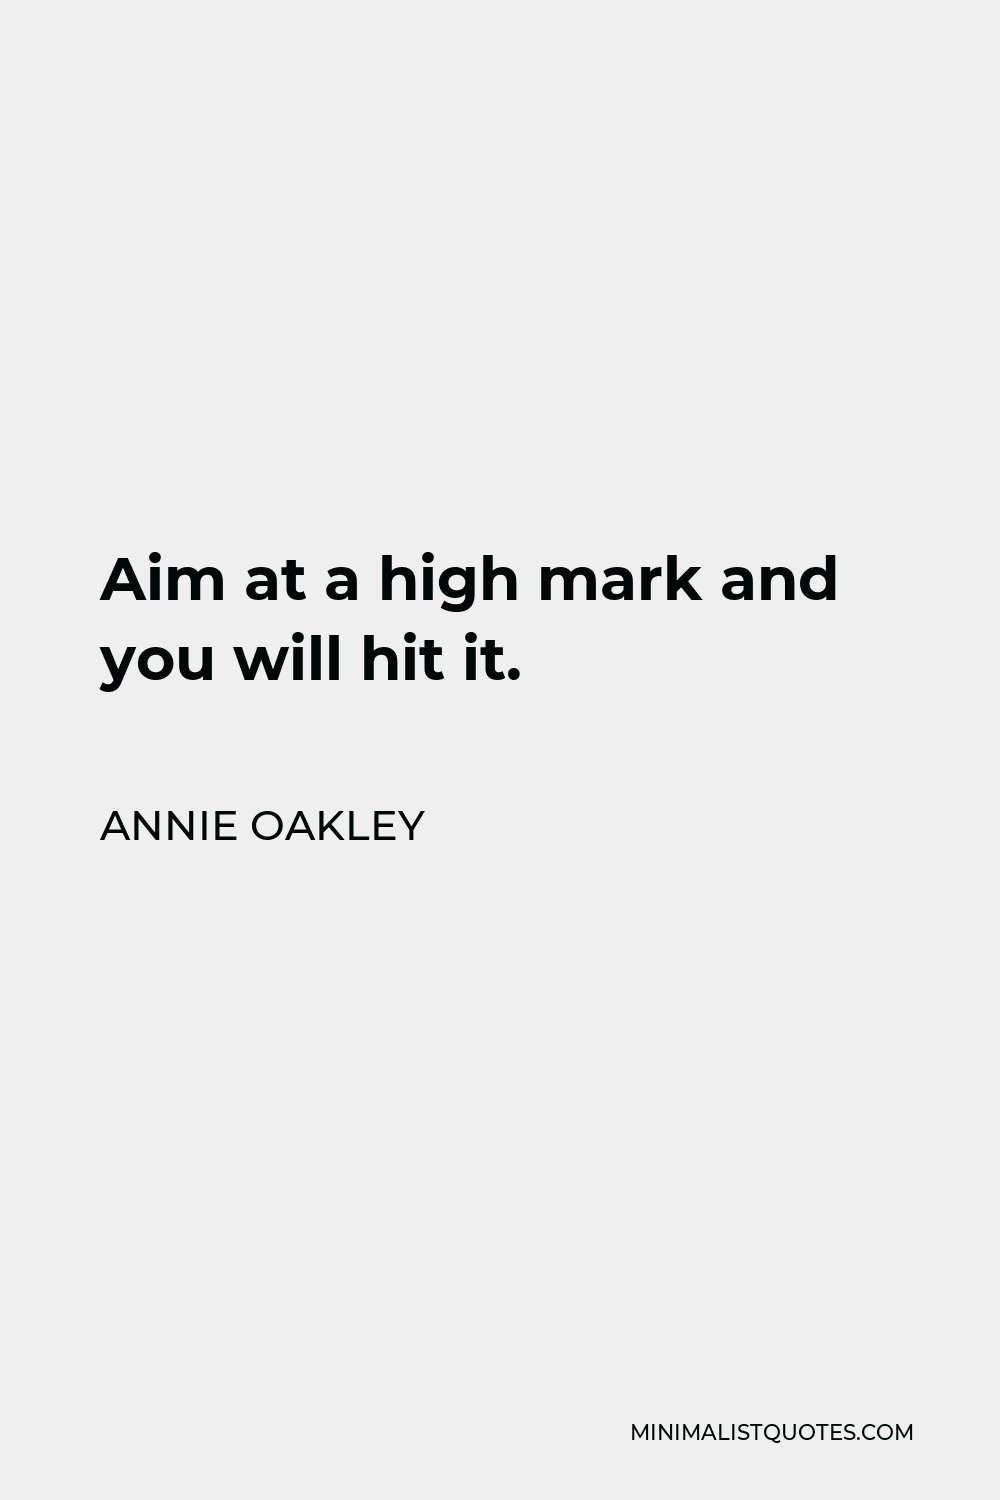 Annie Oakley Quote - Aim at a high mark and you will hit it.